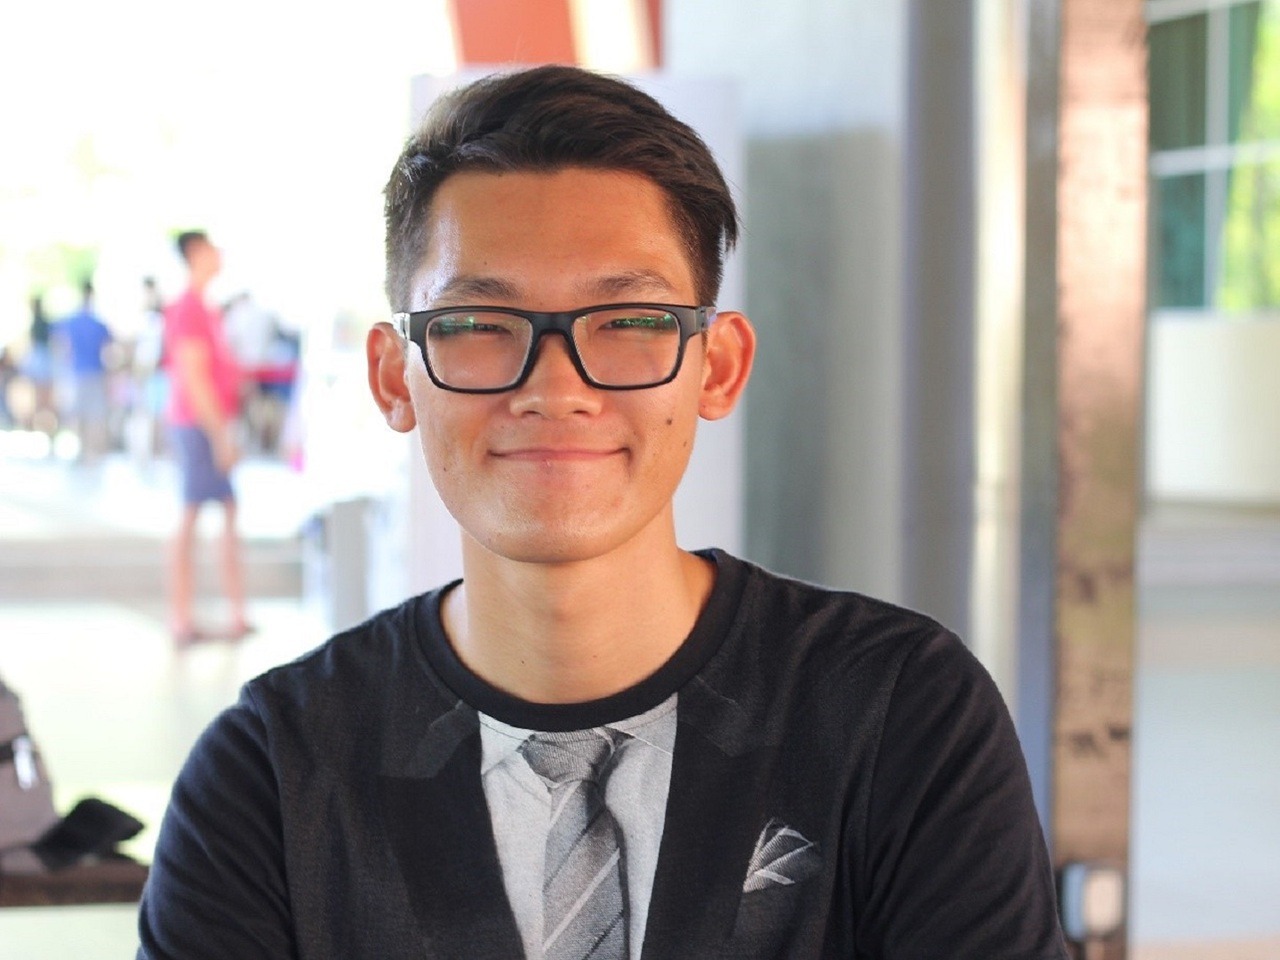 “It felt great to study at Curtin Malaysia. The facilities are excellent and the environment very conducive for studies. I enjoyed studying in the library, and the wide open spaces and beautiful surroundings helped relieve my stress and motivated me...